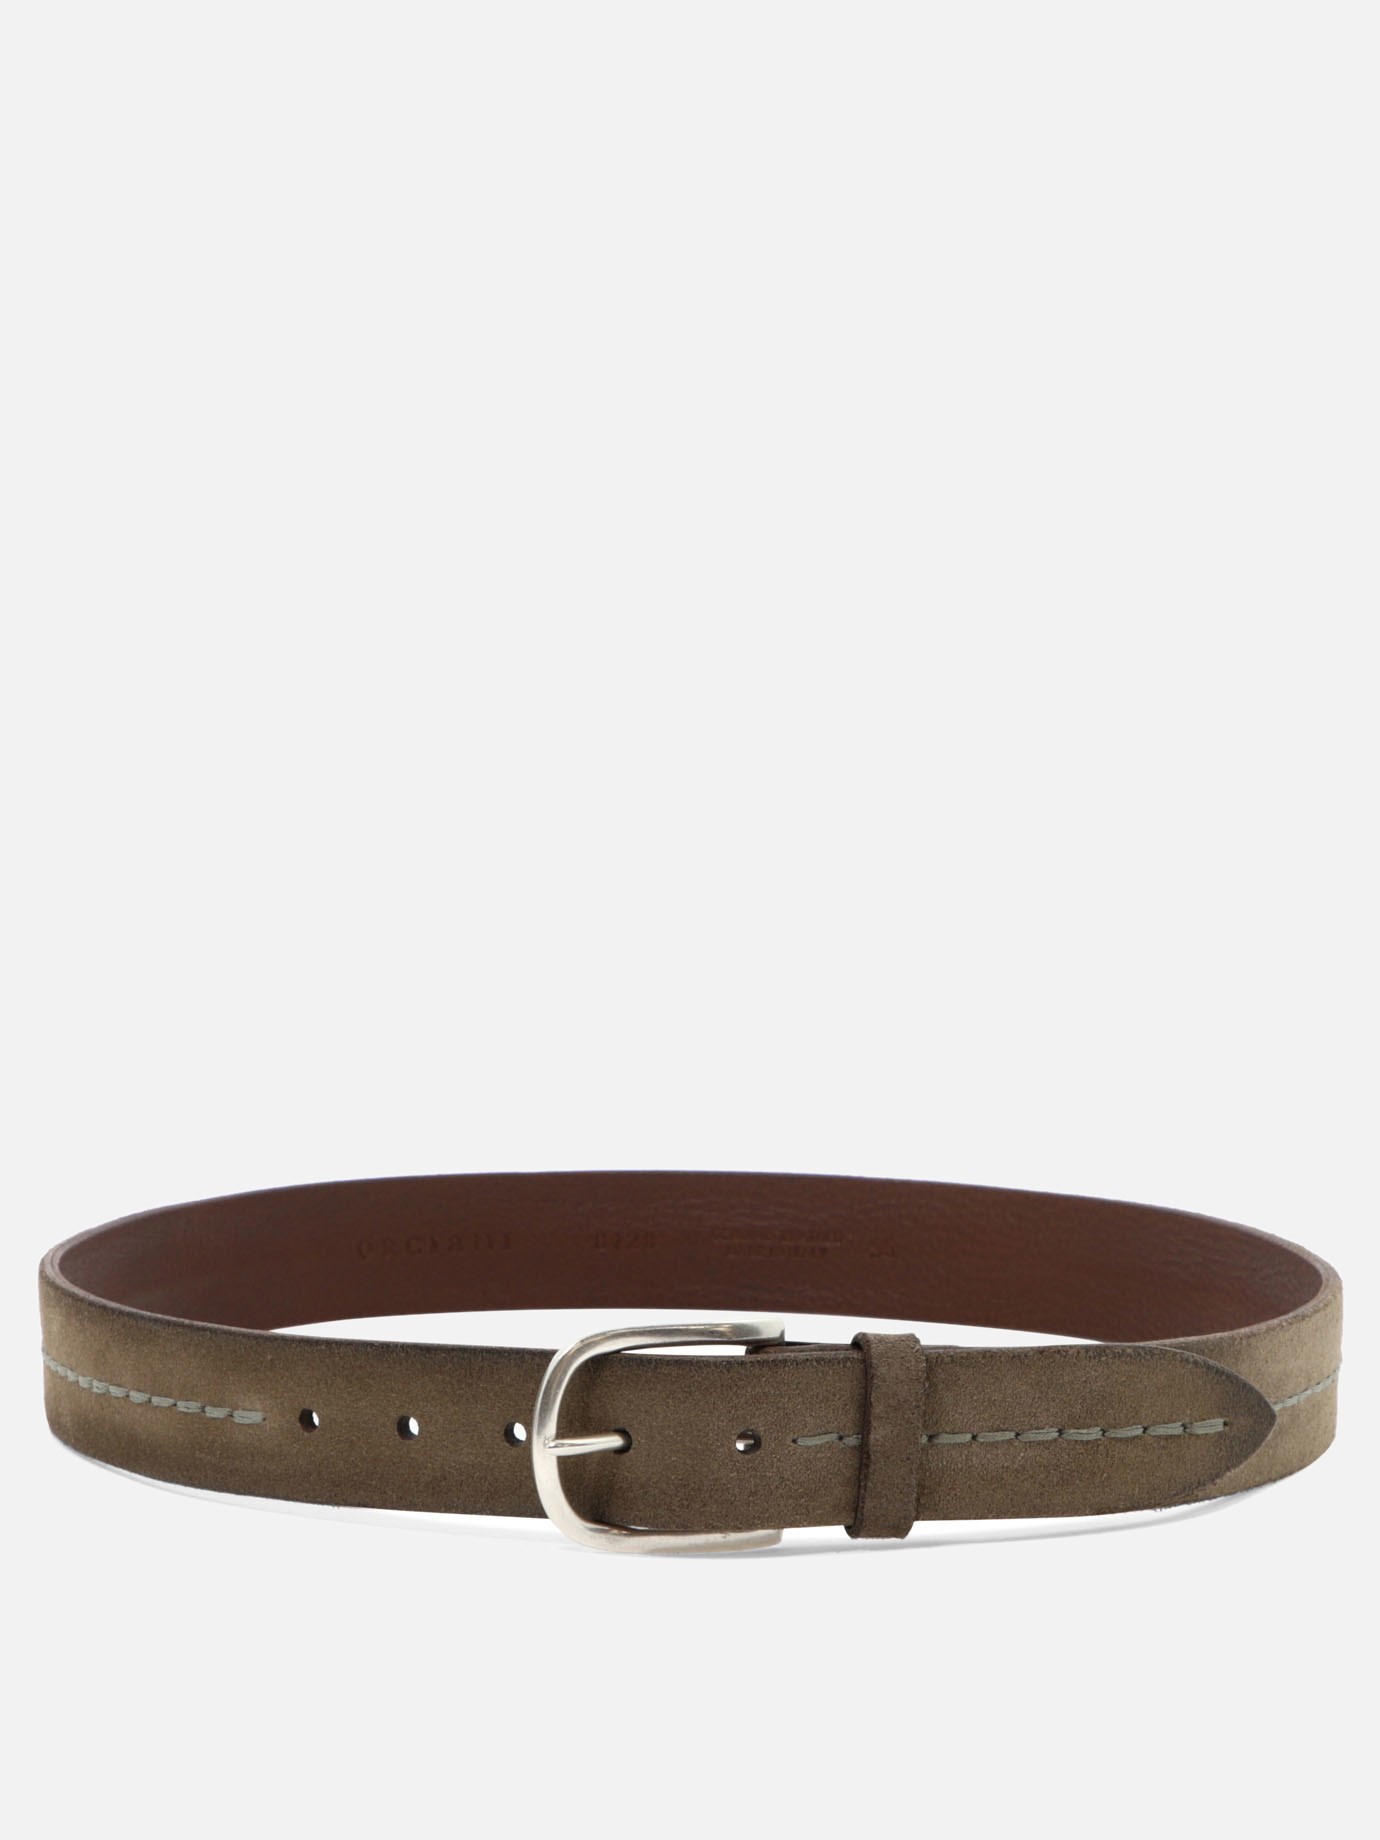 Suede beltby Orciani - 1